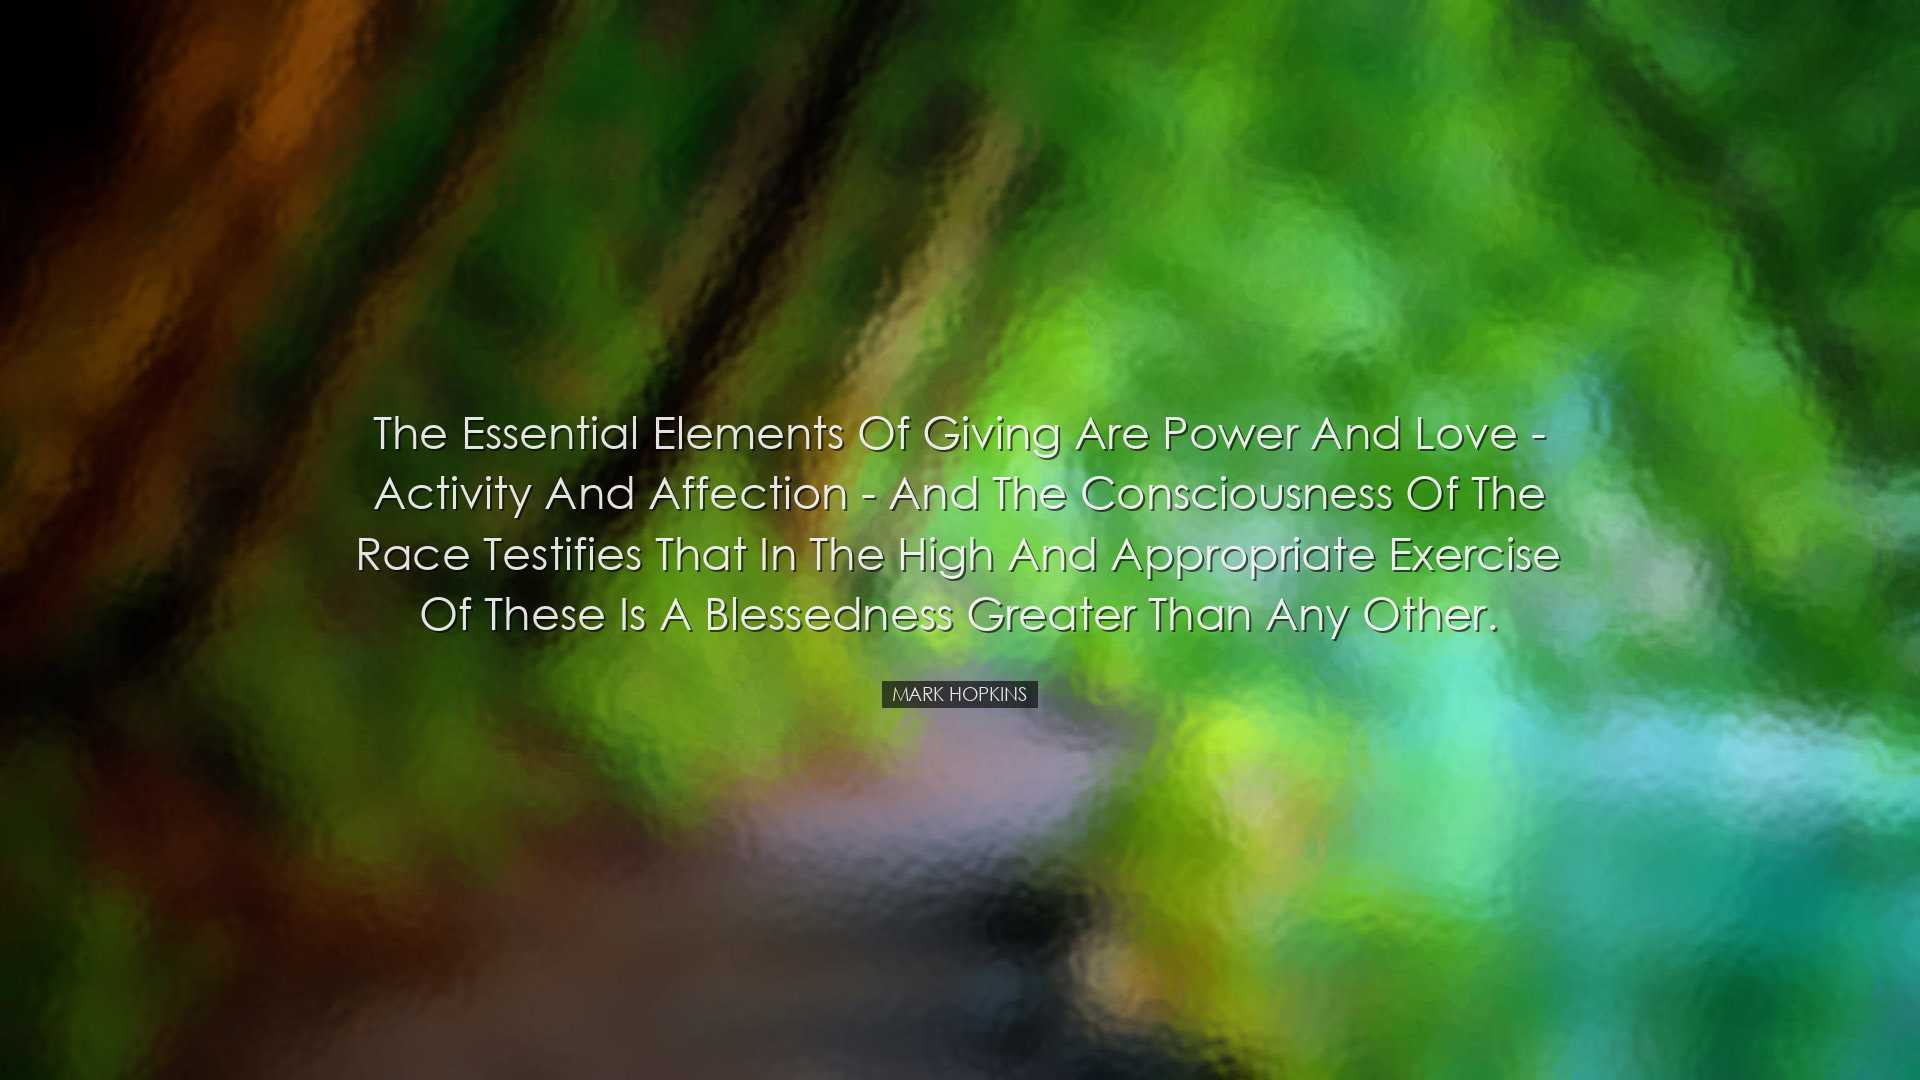 The essential elements of giving are power and love - activity and